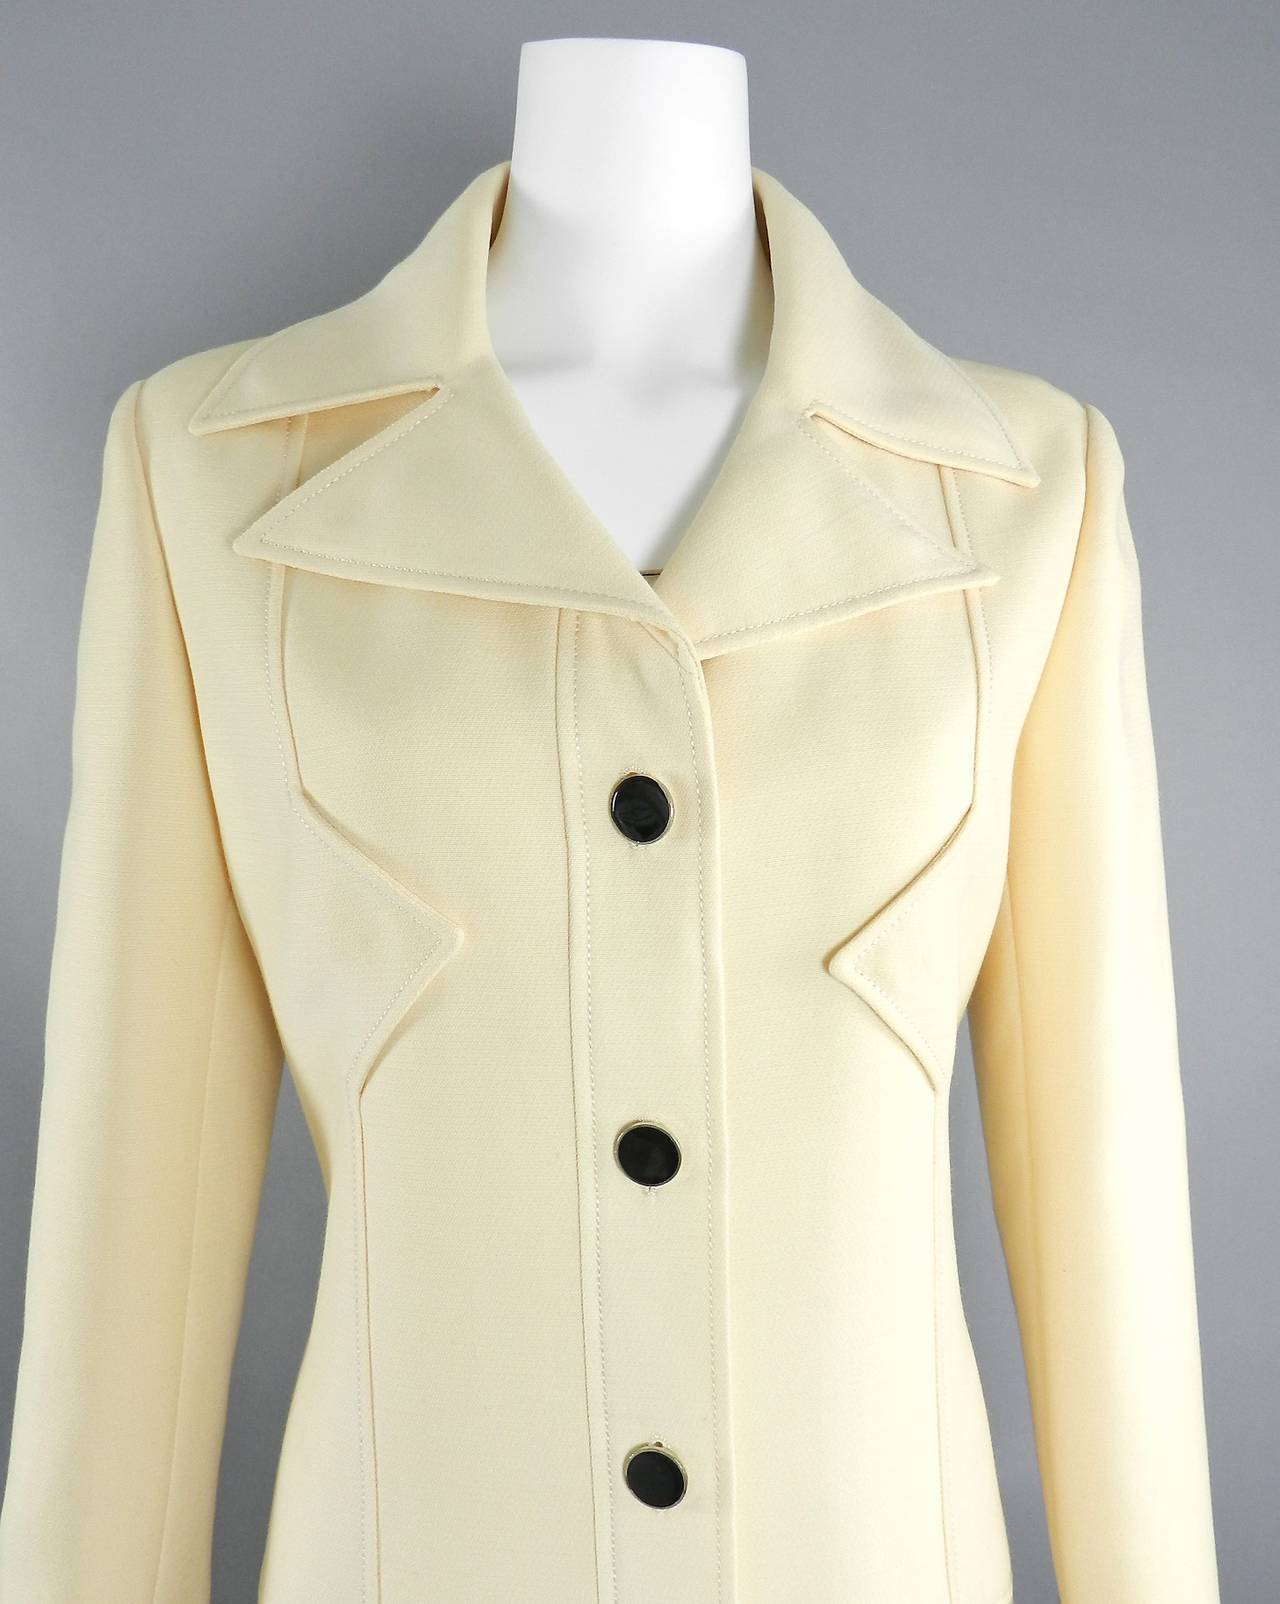 Vintage early 1970's Pierre Cardin cream wool coat. Excellent clean condition with no marks on the wool. Garment measures 39